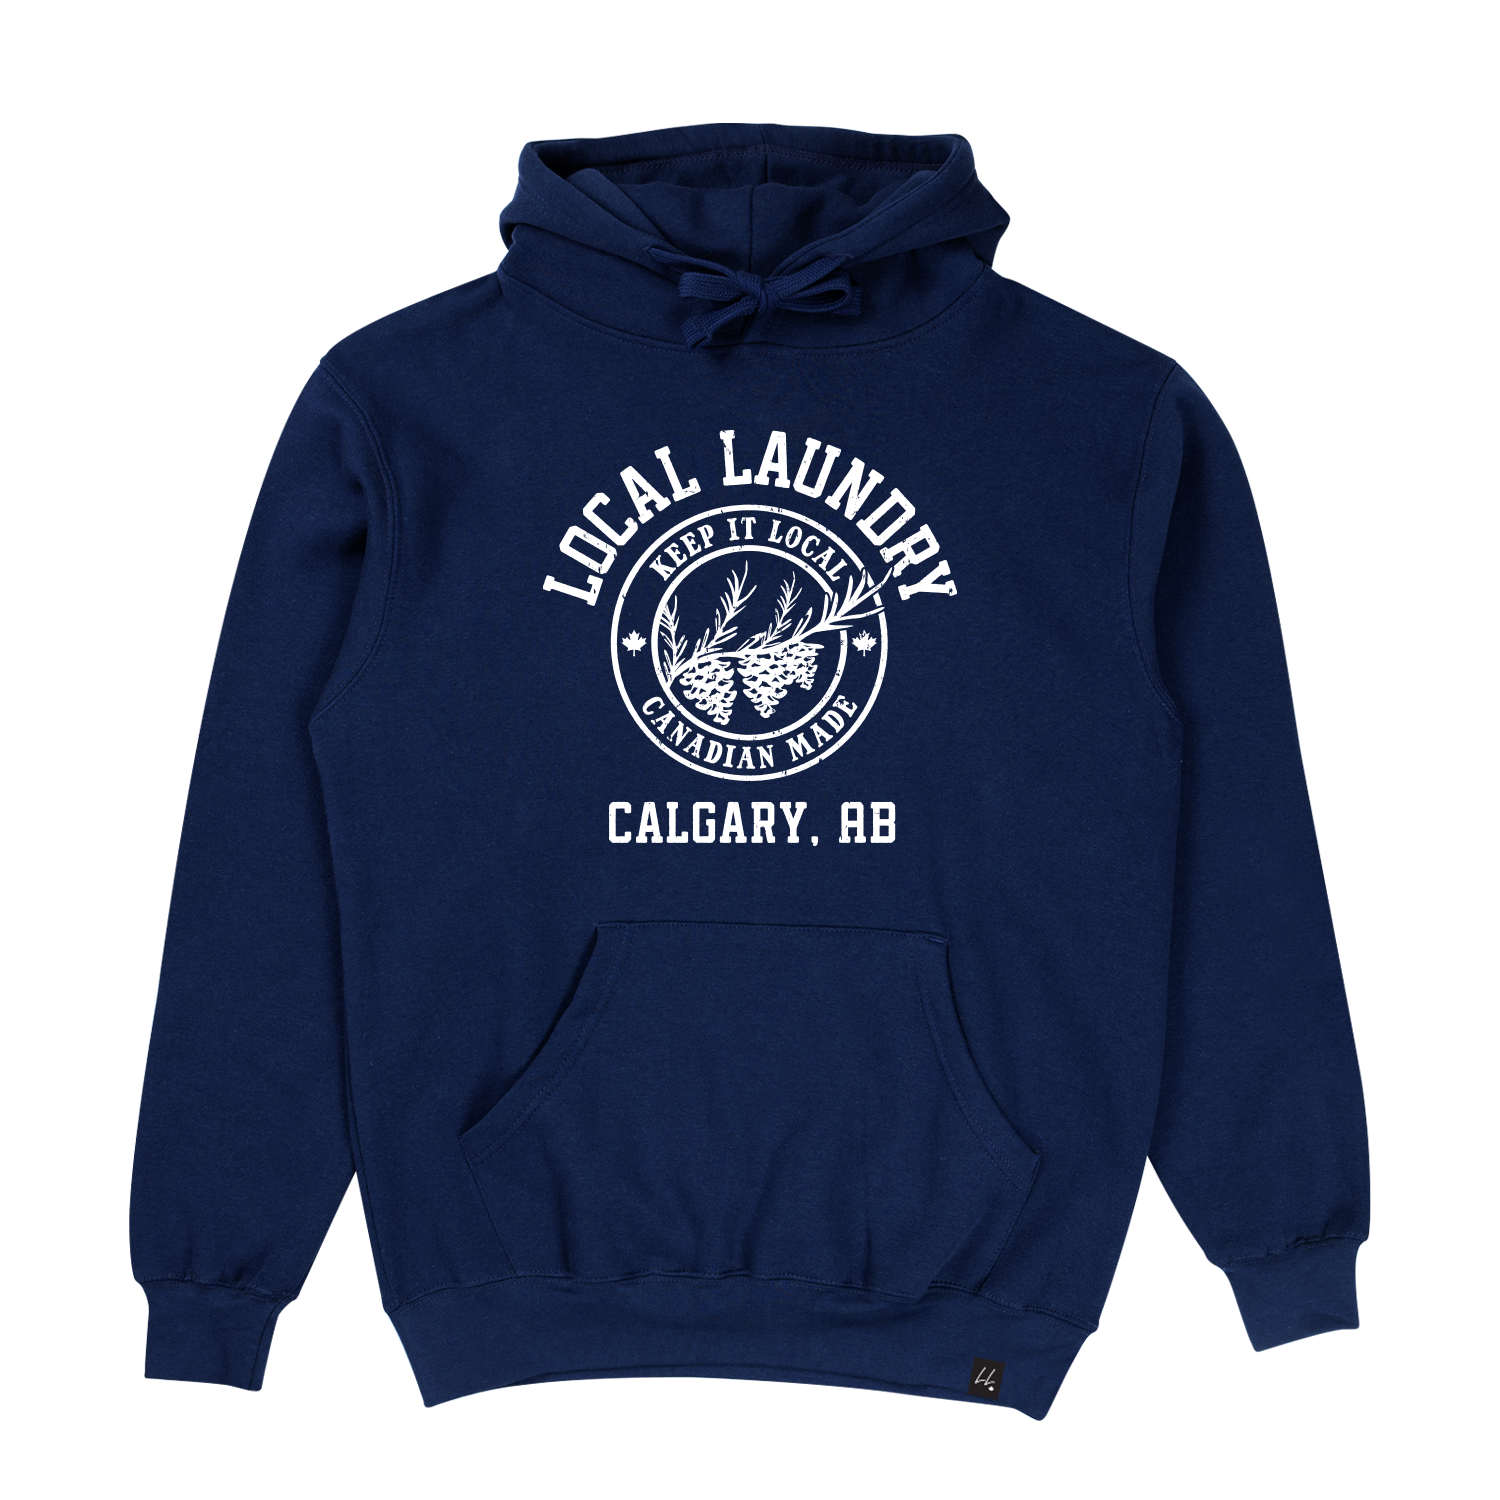 The Local Laundry Varsity hoodie in navy blue featuring a white graphic on the front torso. The graphic features a crest with three pine cones and 